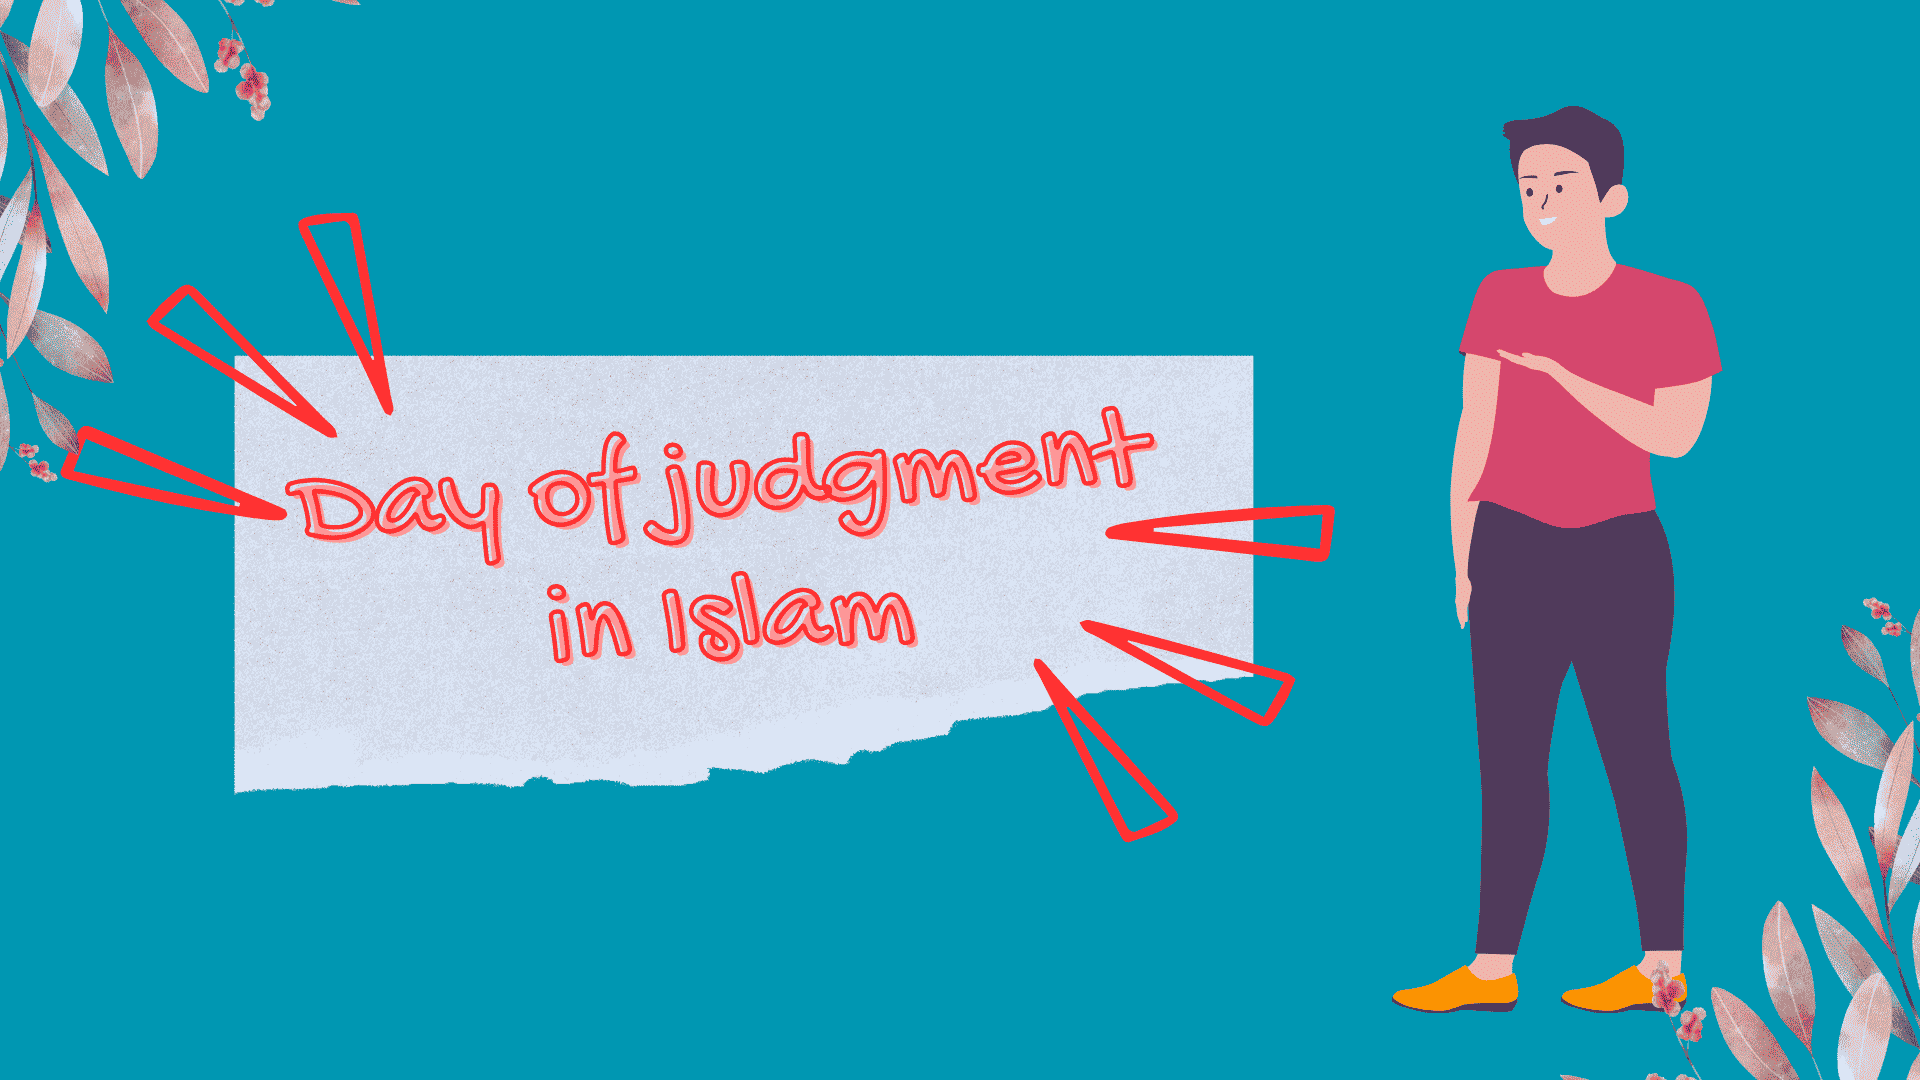 Day of judgment in Islam